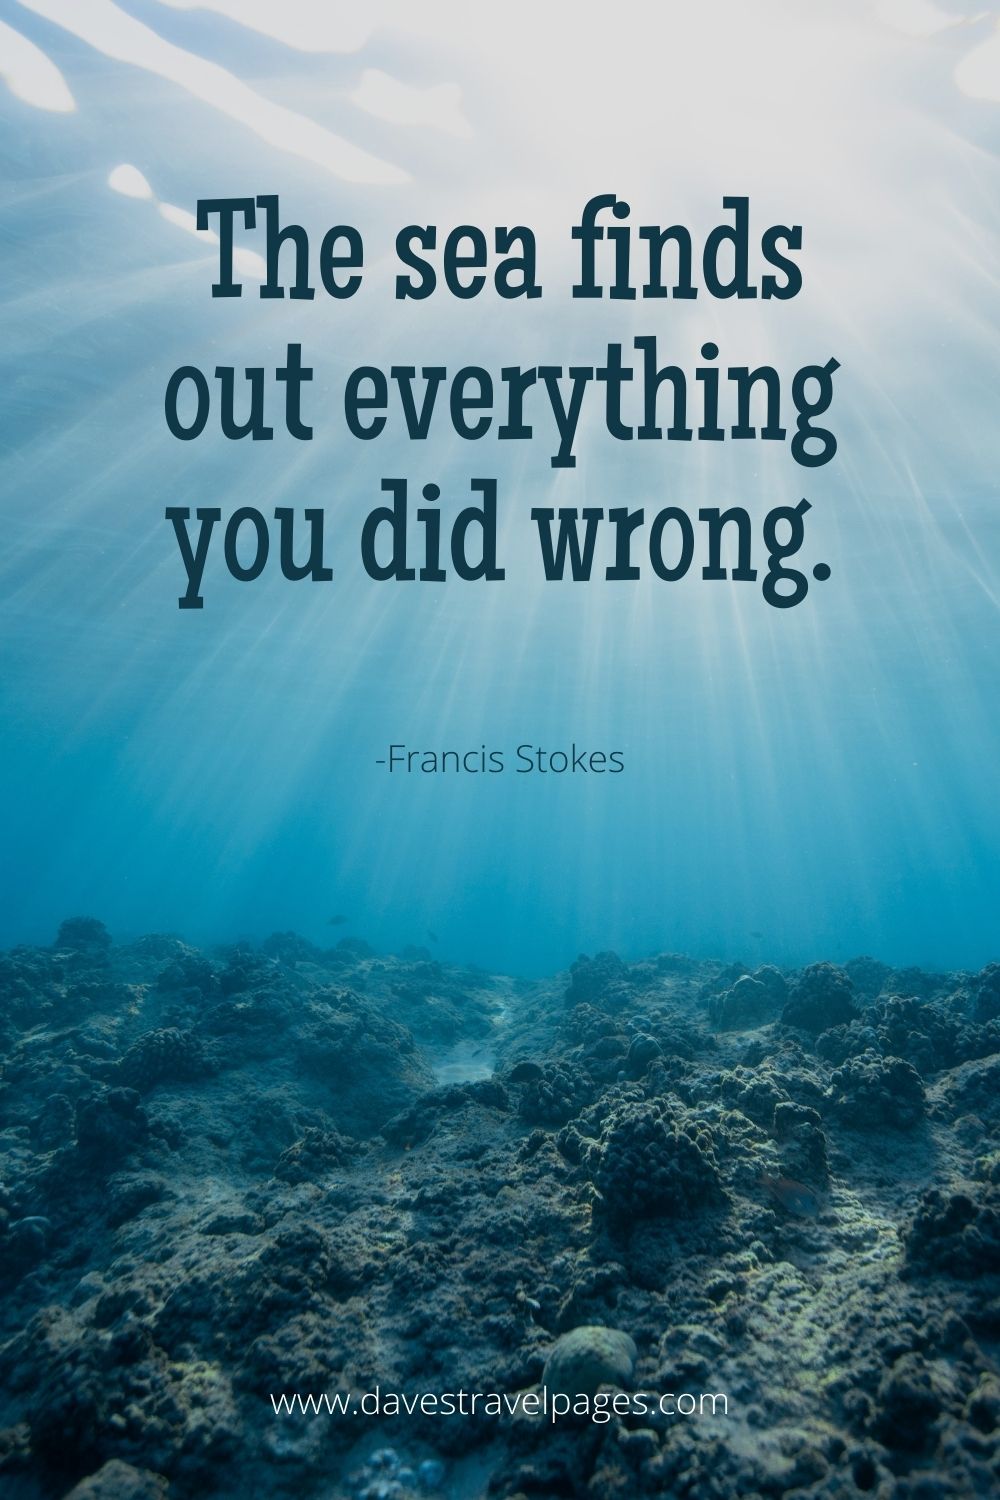 The sea finds out everything you did wrong.